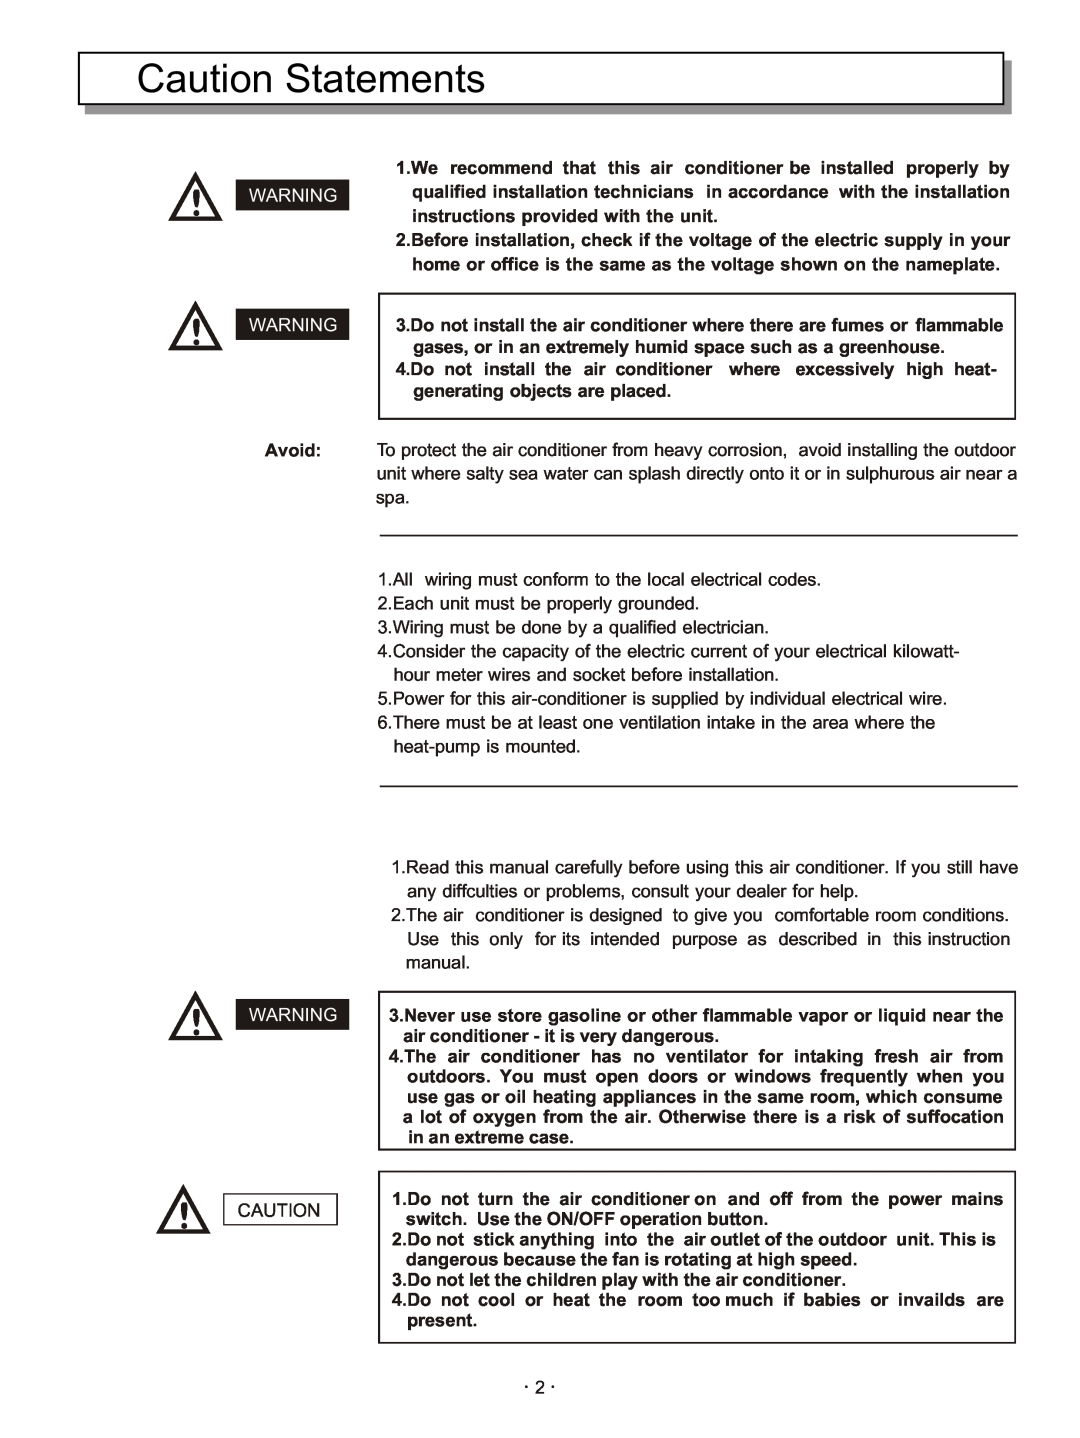 Hisense Group KFR 25GWE, KFR 3201GWE, KFR 33GWE, KFR 28GWE, KFR 2101GWE instruction manual Caution Statements 